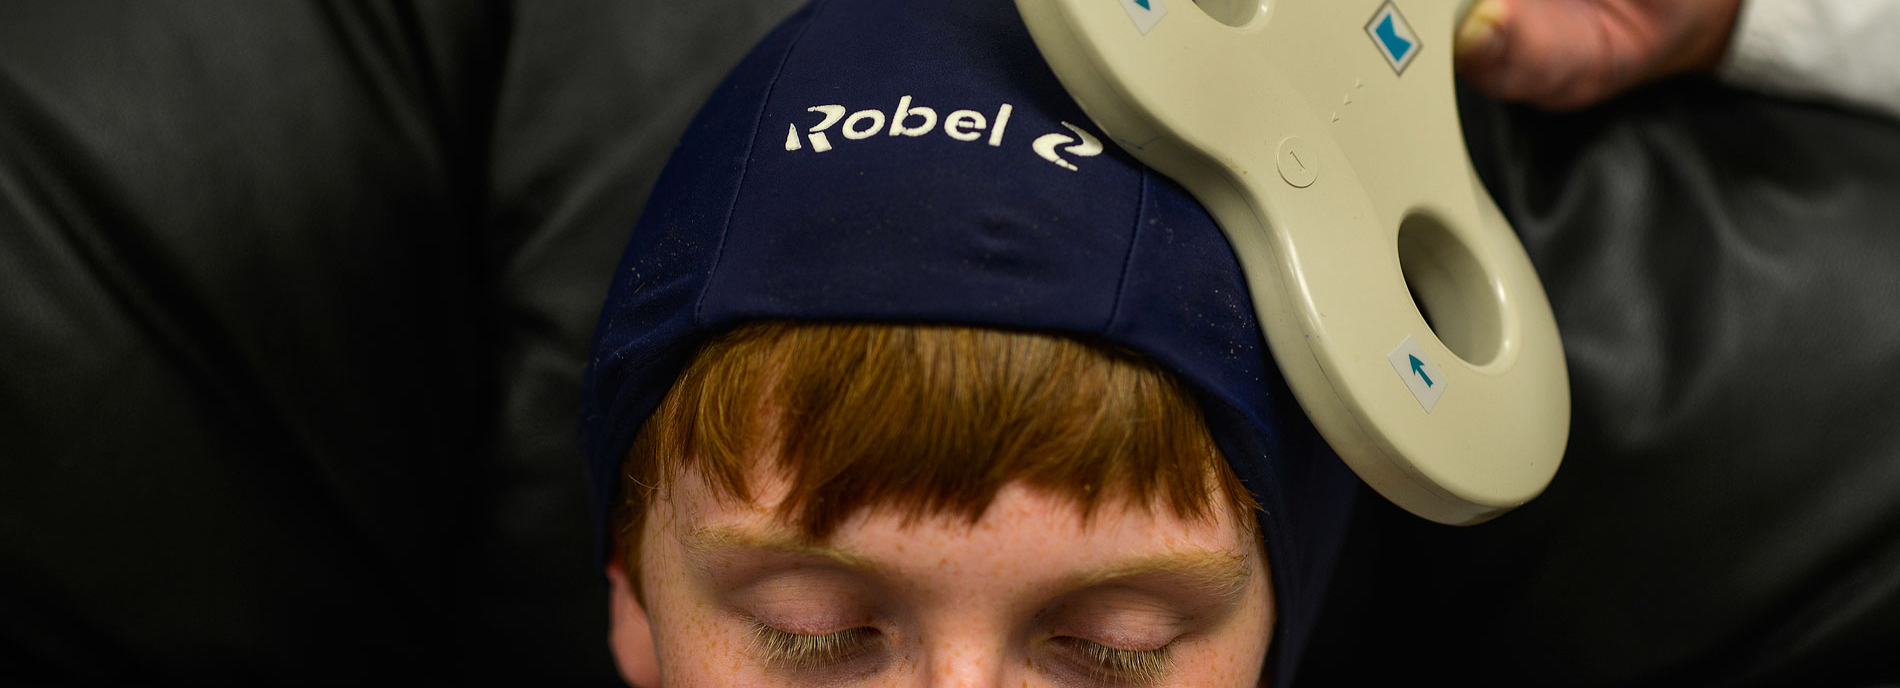 Young Will Robeson closes his eyes as he undergoes transcranial magnetic stimulation by way of a magnetic wand.